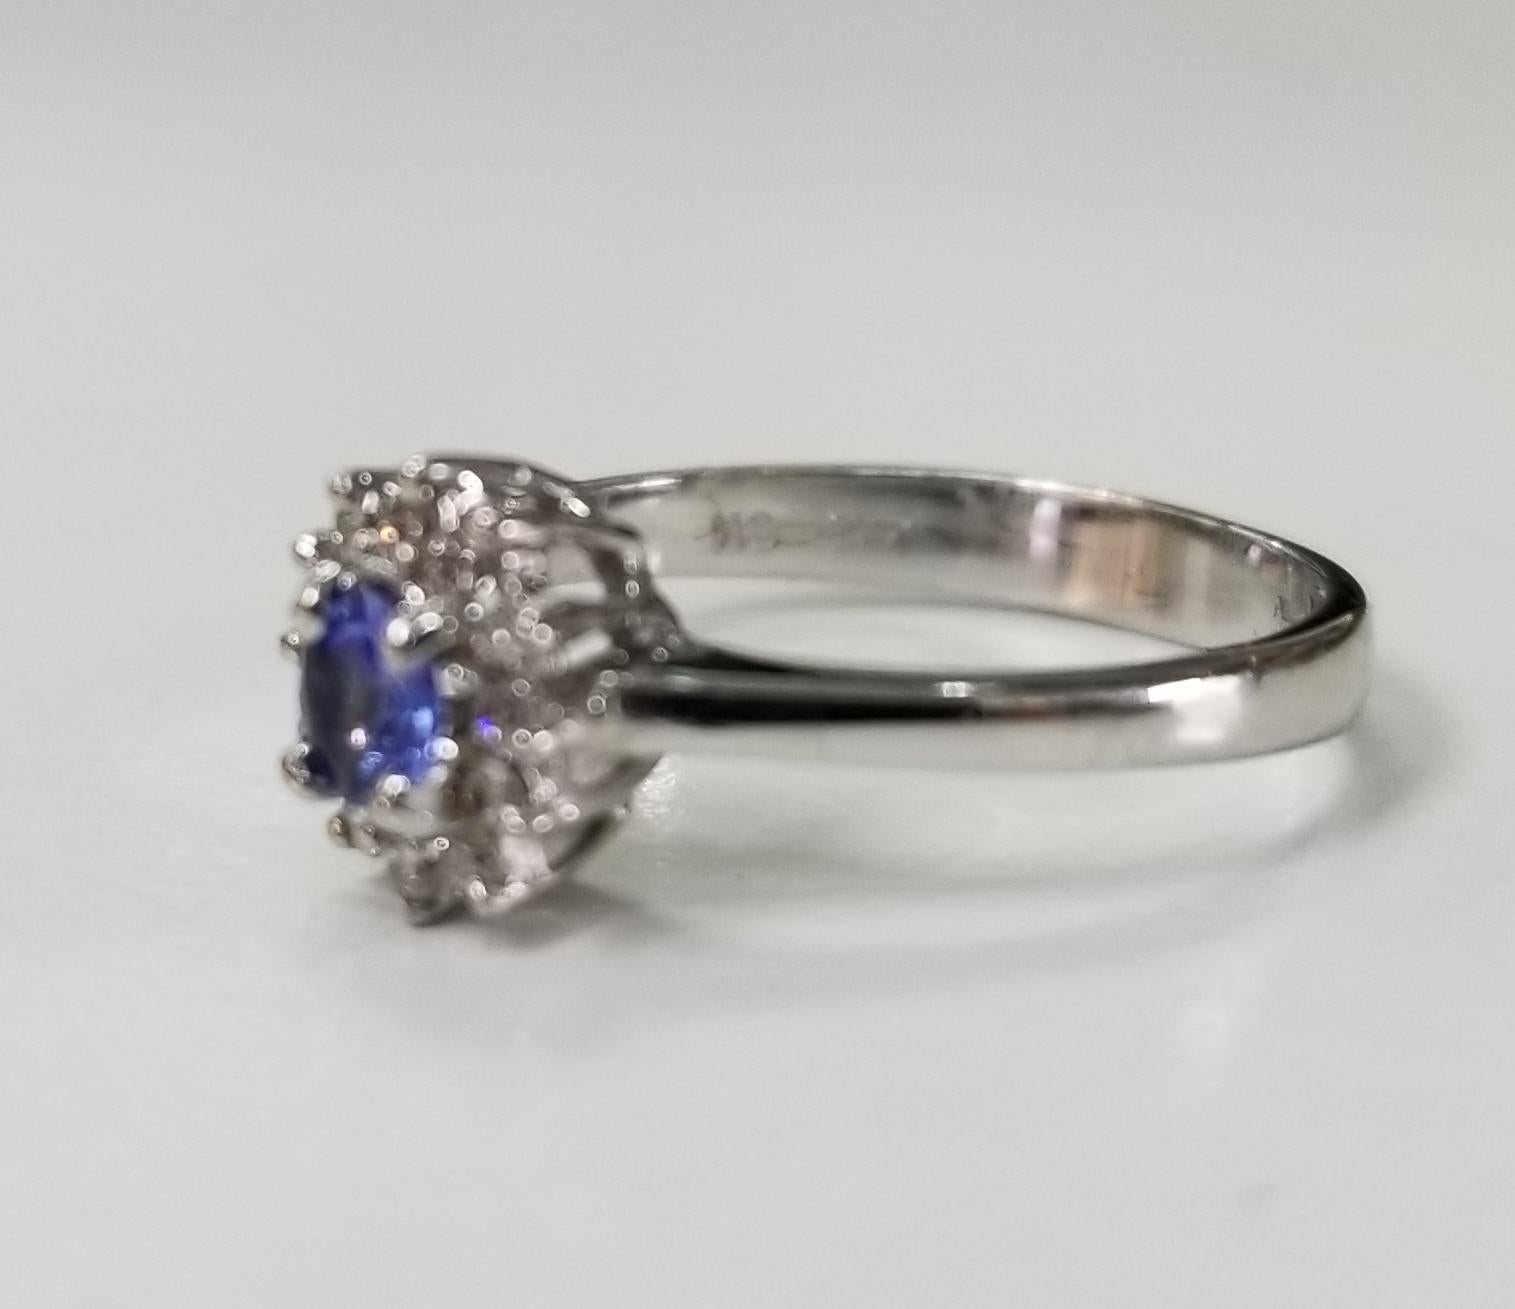 14k white gold Tanzanite and diamond cluster ring, containing 1 round tanzanite weighing .15pts. and 12 round full cut diamonds of very fine quality weighing .12pts.  This ring is a size 4.5 but we will size to fit for free.